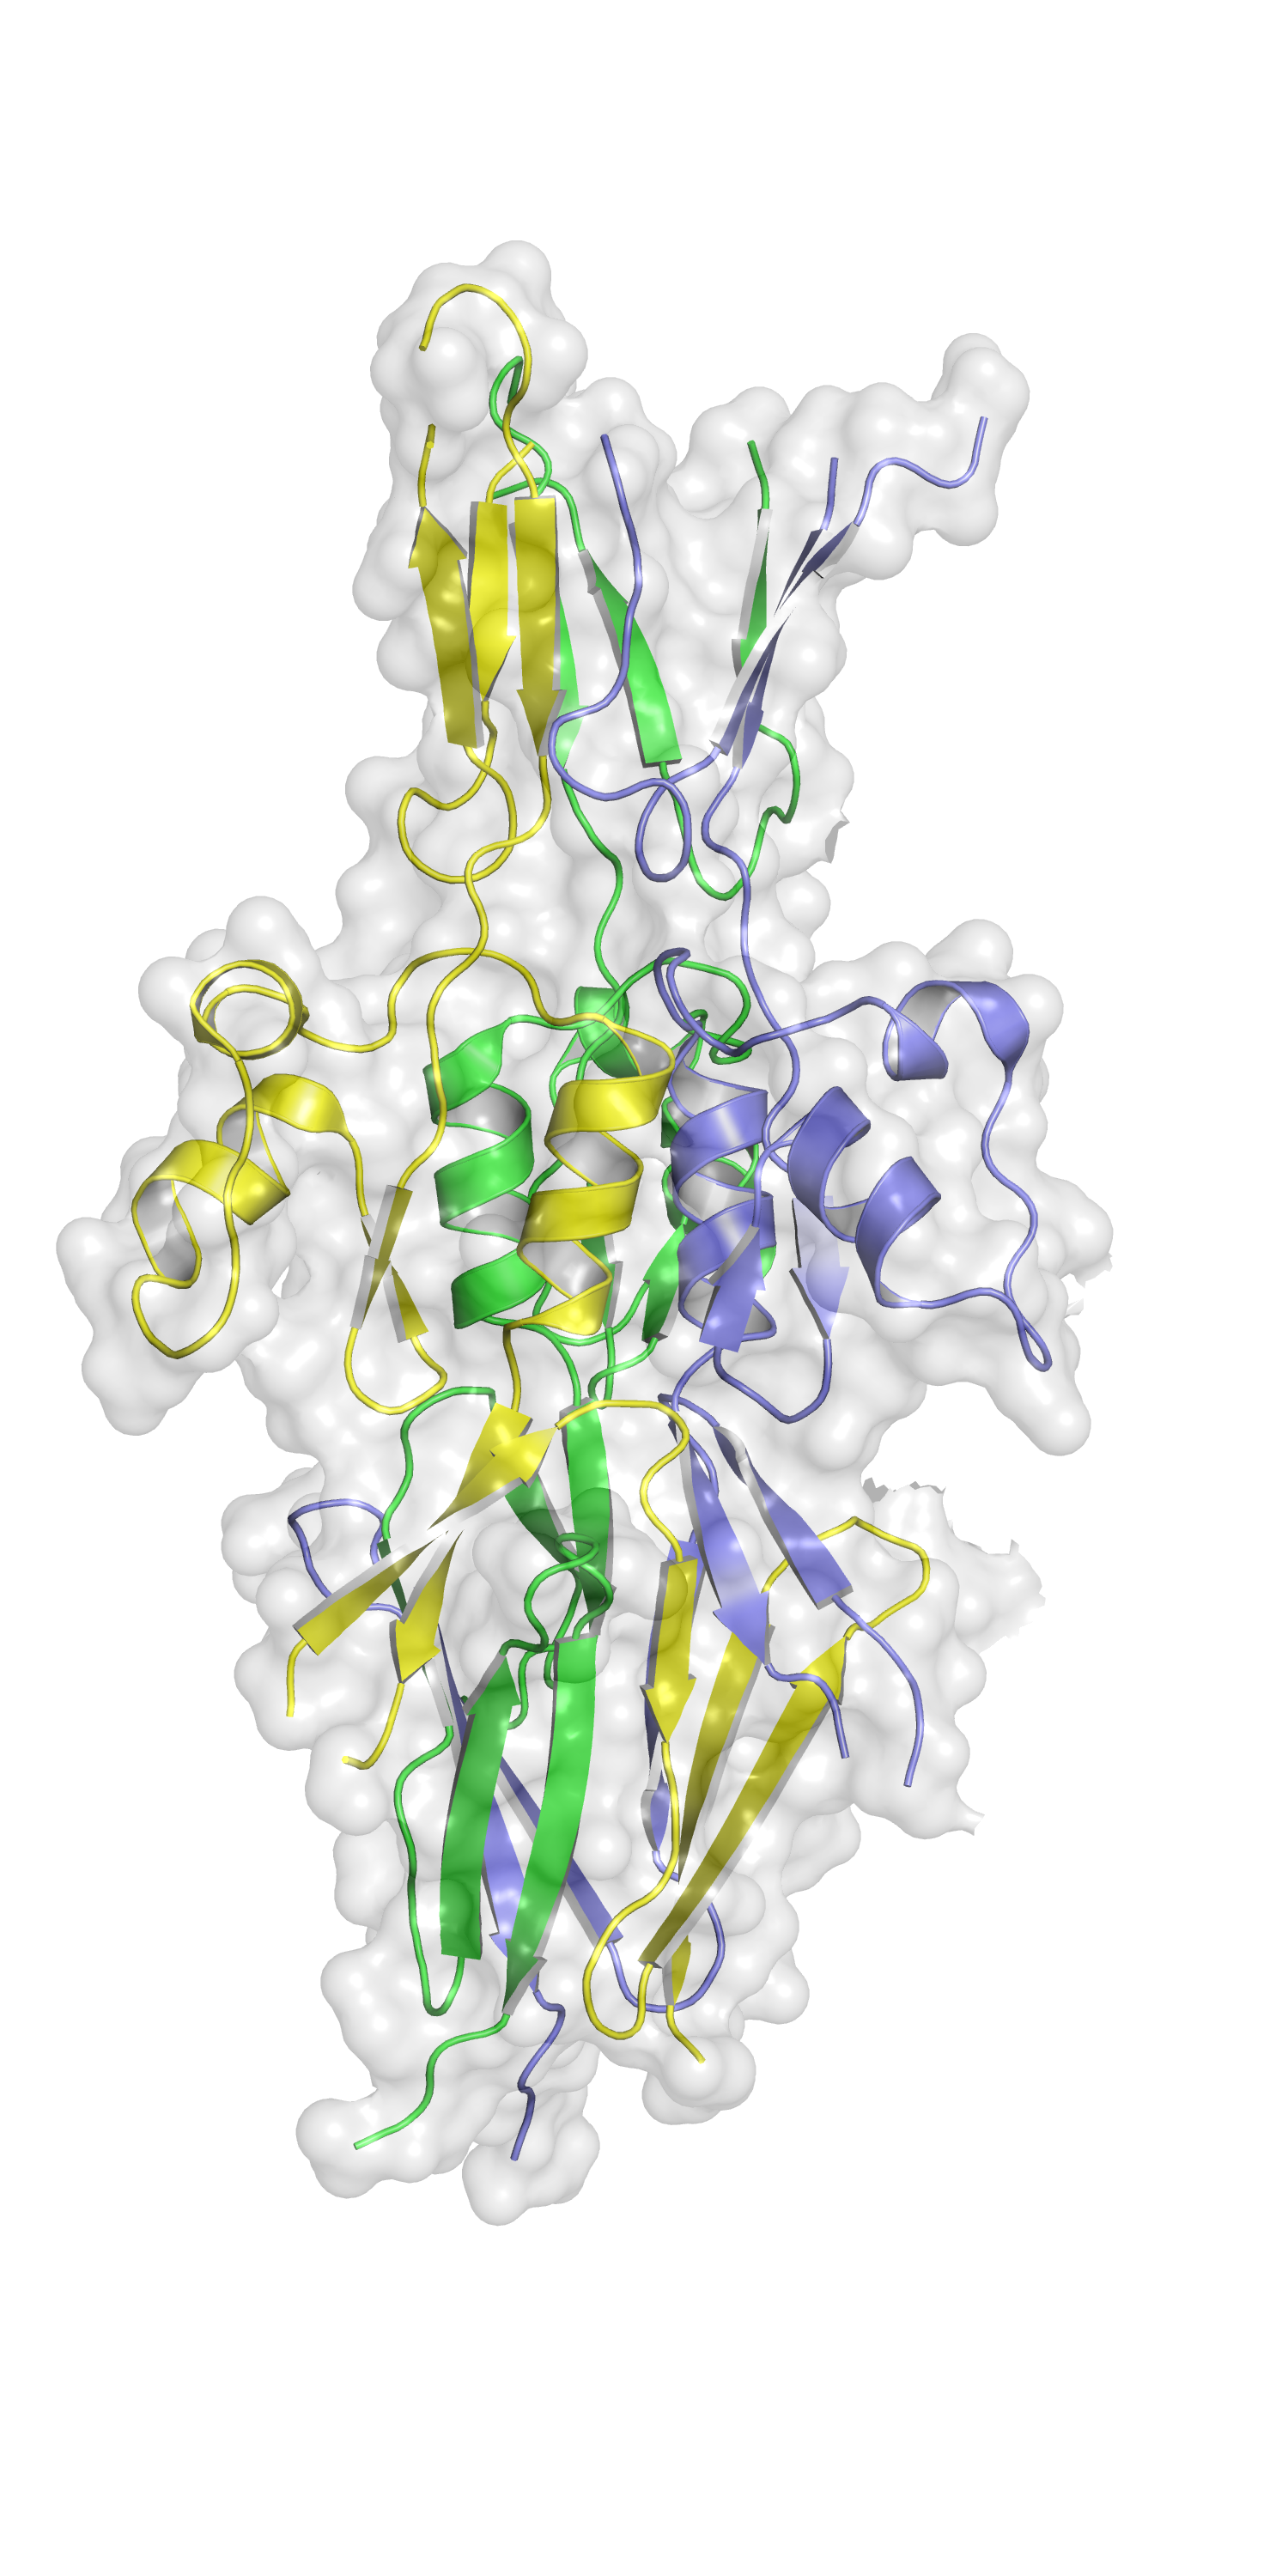 Figure 1: Crystal structure of HsfPD1 showing its trimeric architecture and novel domain arrangement. The three subunits are coloured yellow, blue and green. (Credit: by Maren Thomsen)